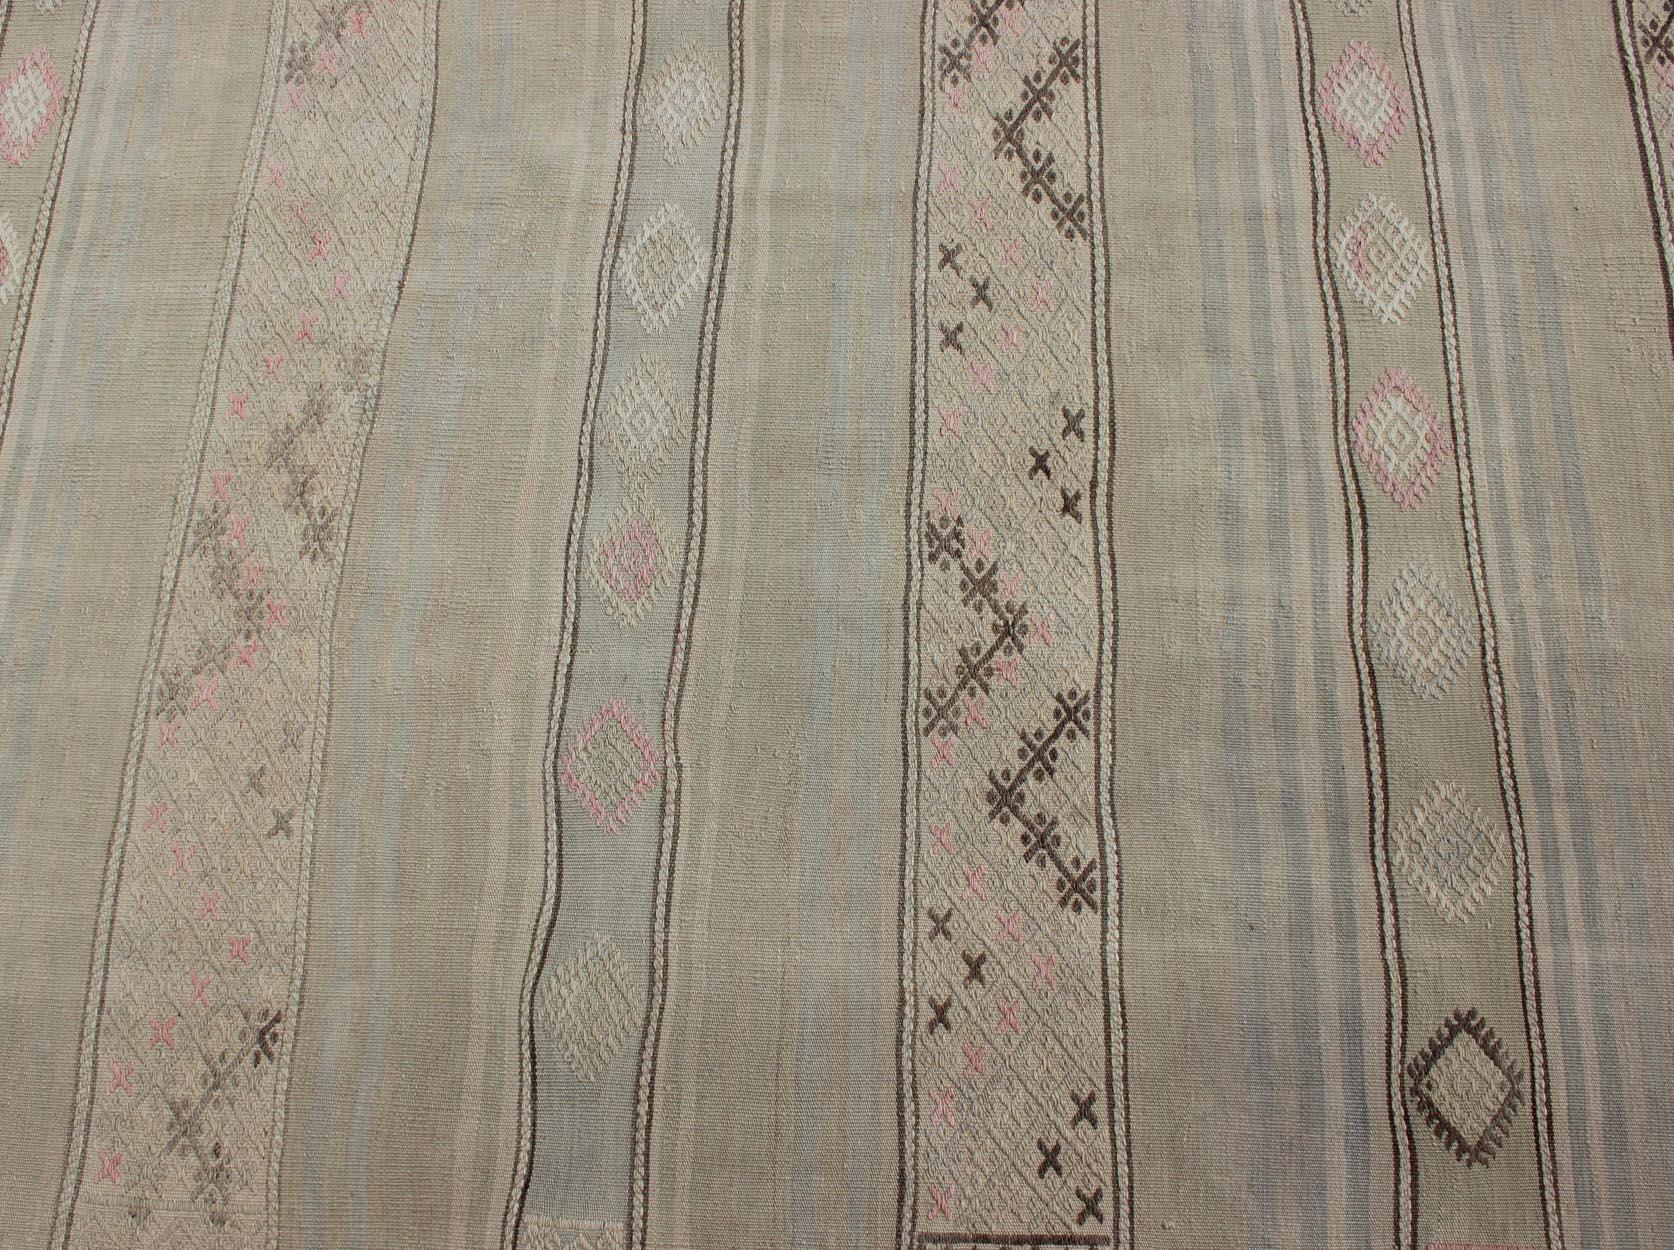 Vintage Turkish Flat-Weave Striped Kilim in Taupe, Pink, and Light Brown For Sale 5